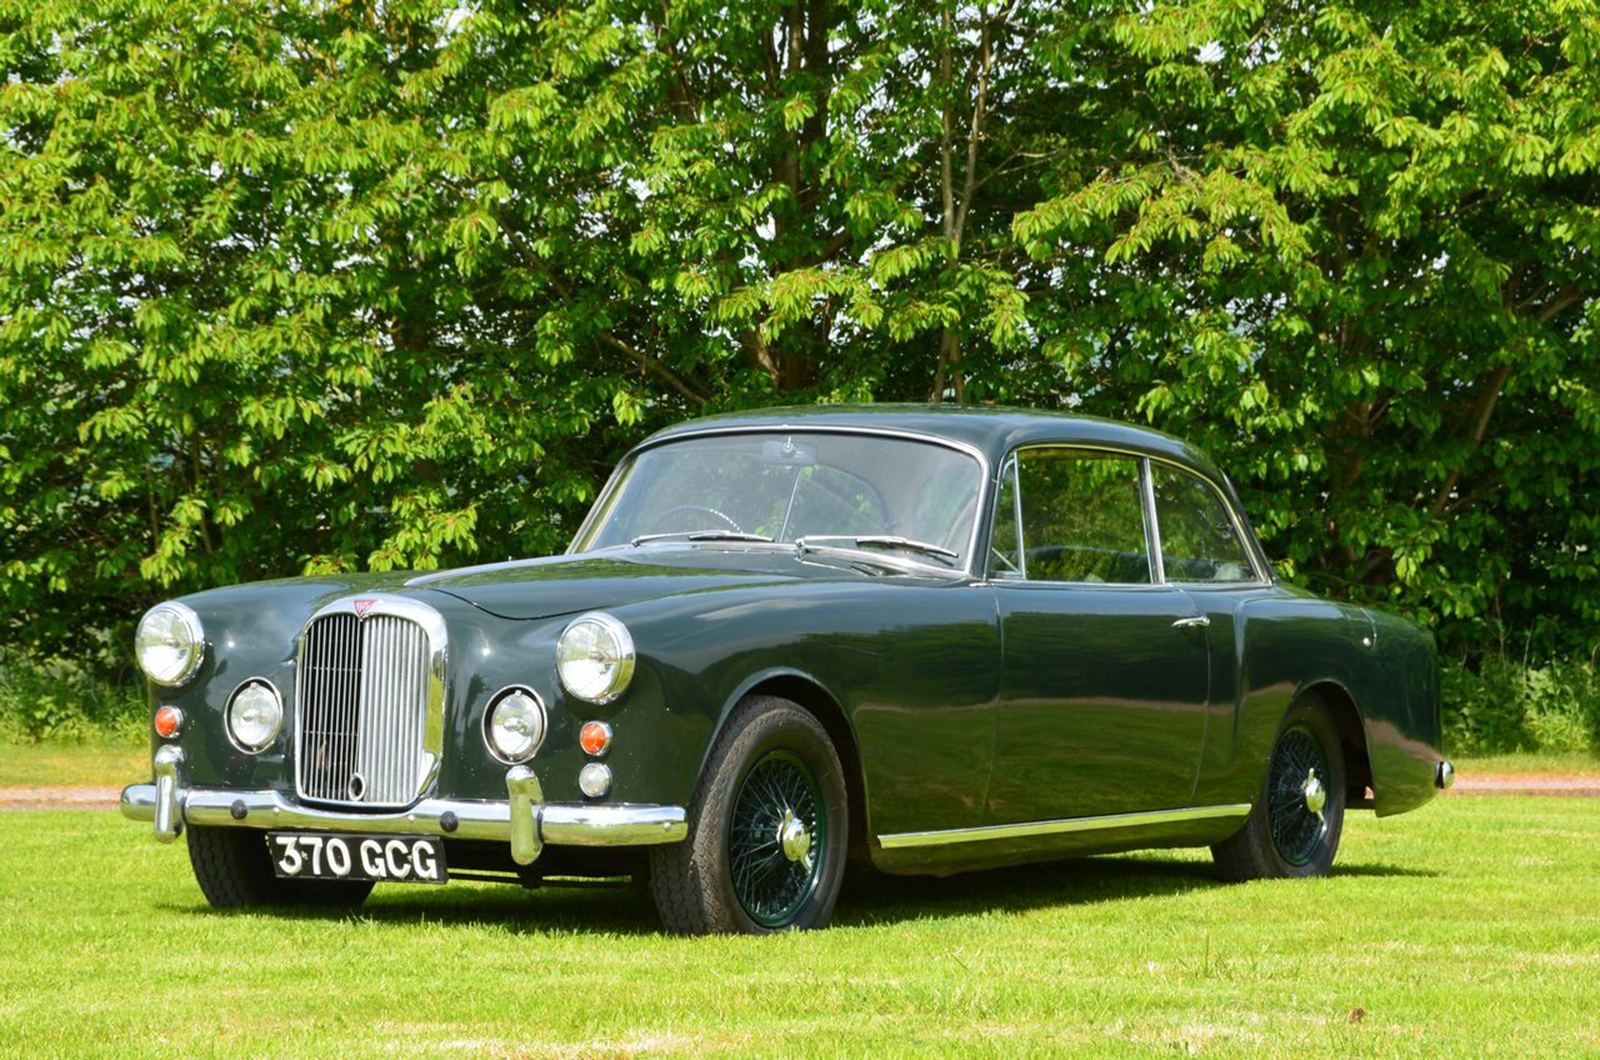 brightwells_Bicester_auction_alvis_TD21_seies_ii.png